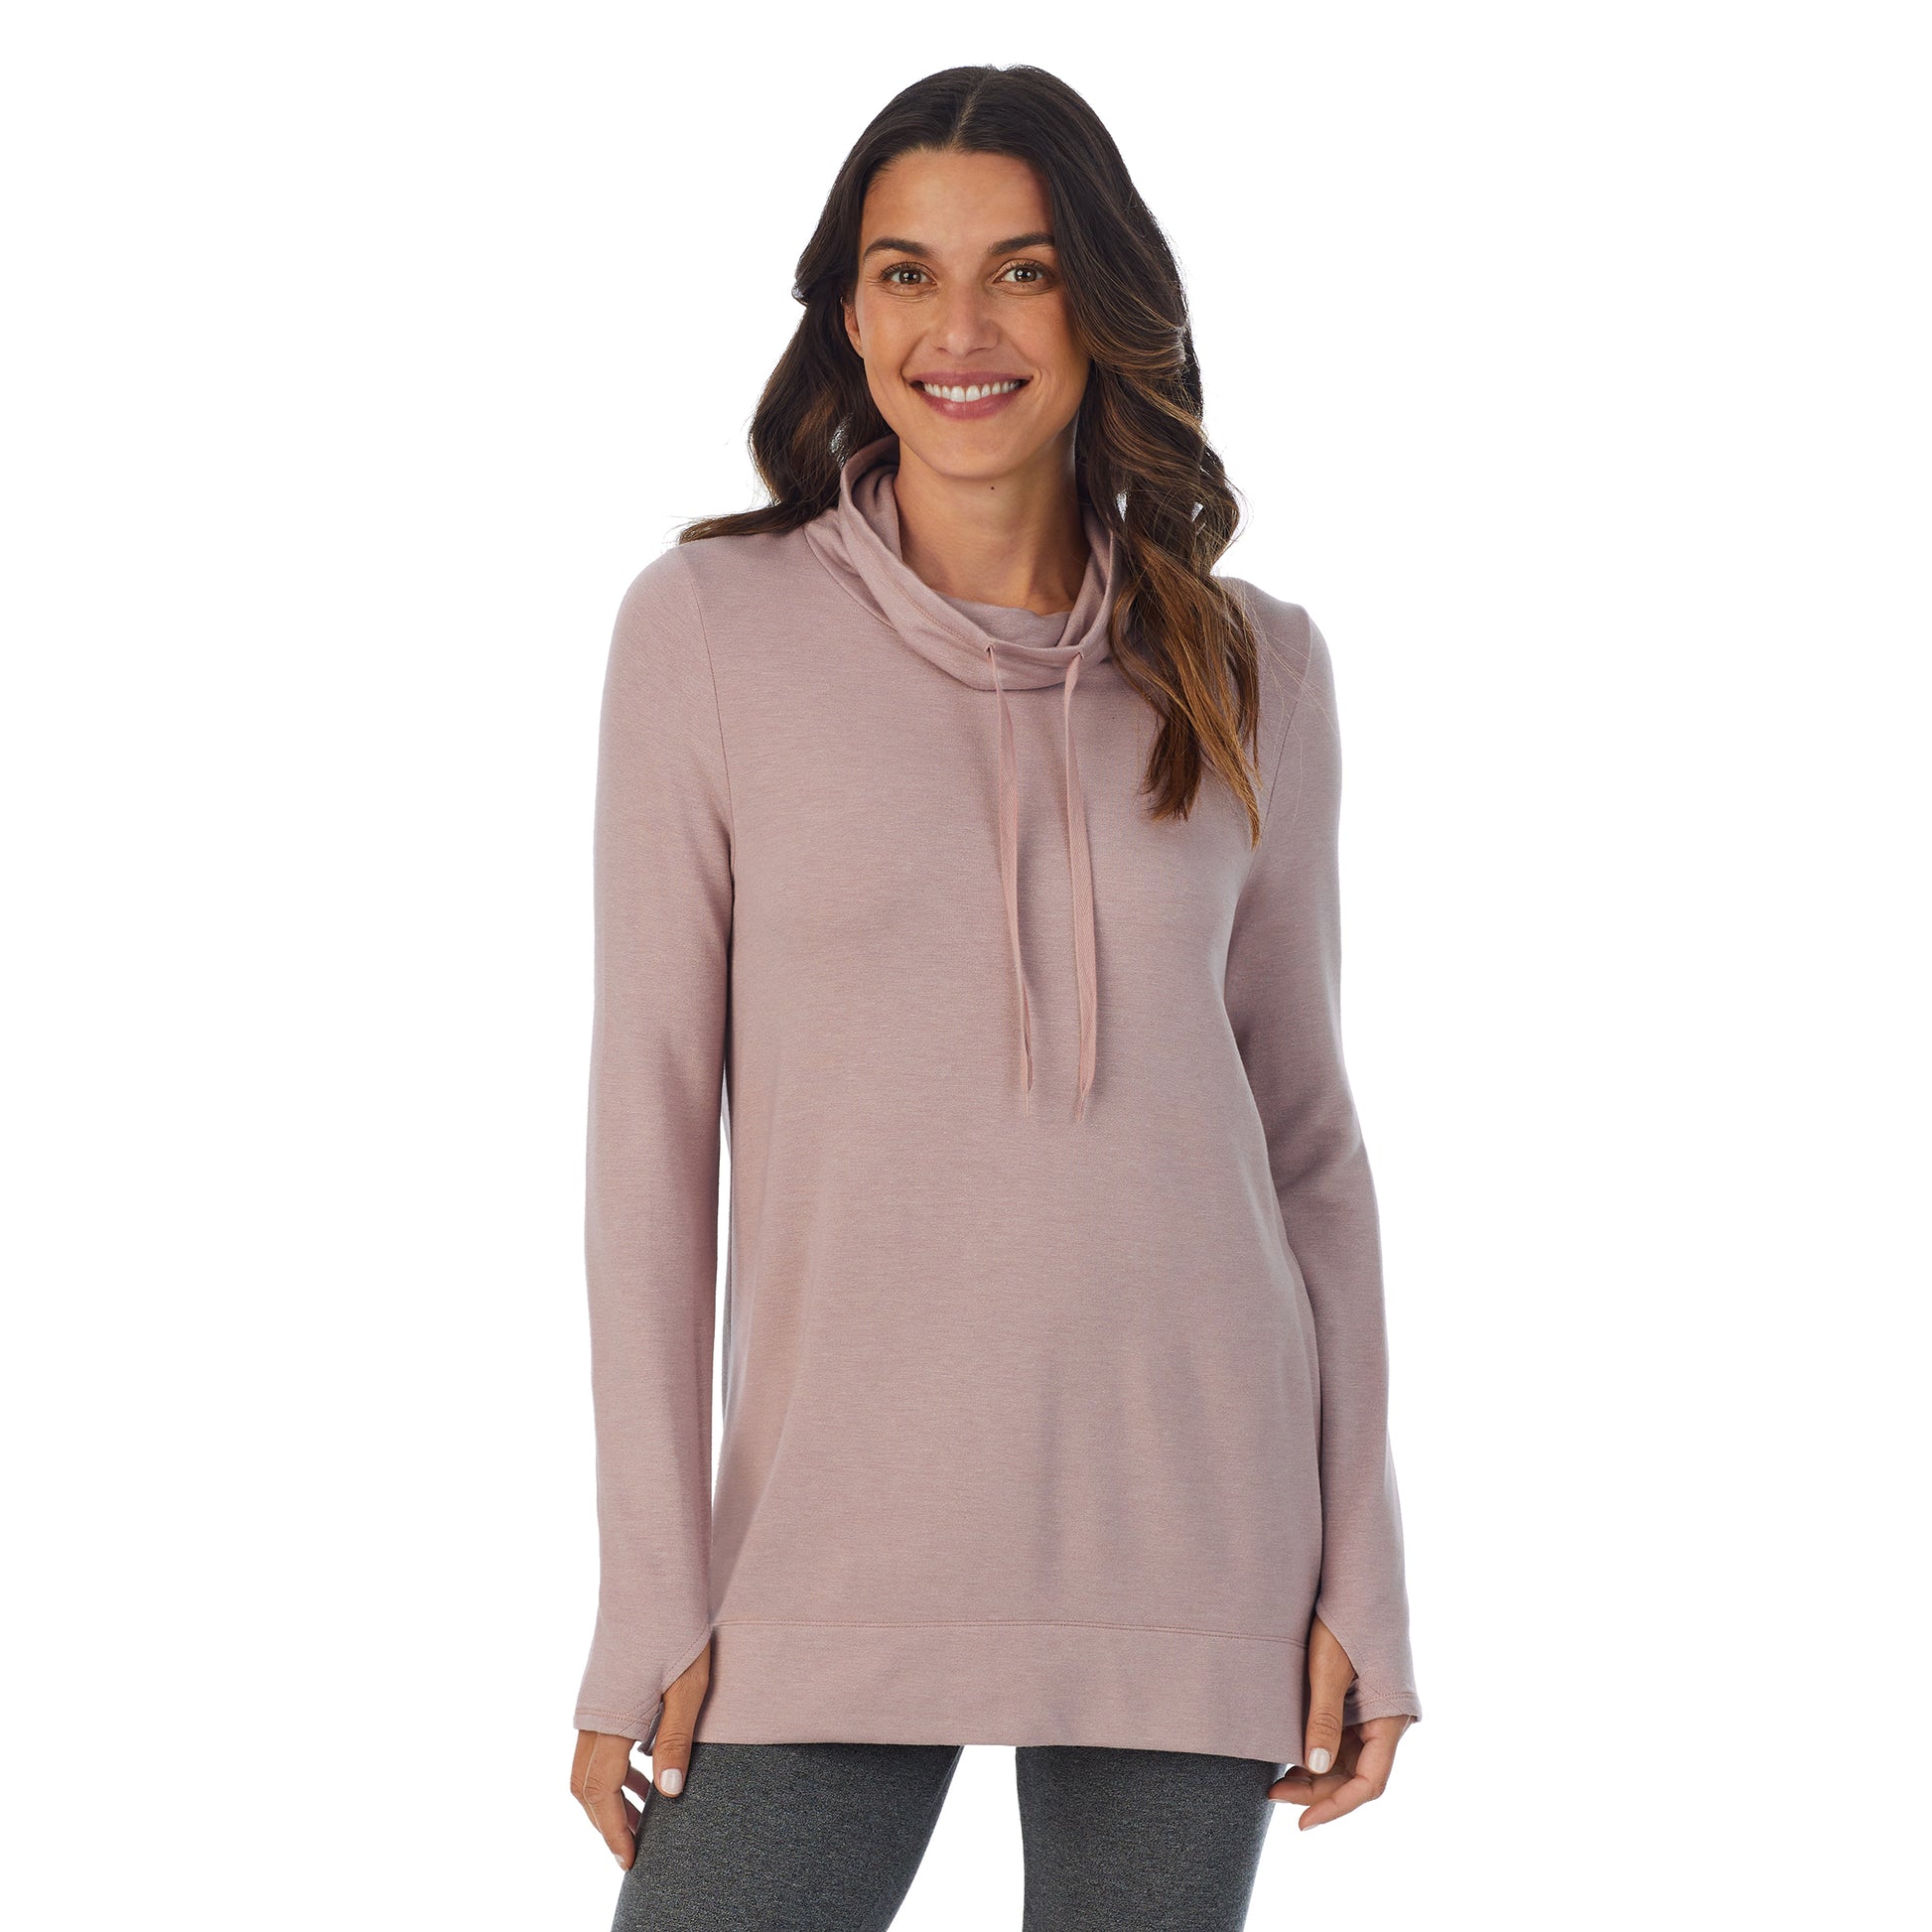 Mauve Shadow Heather;Model is wearing size S. She is 5’9”, Bust 34”, Waist 25.5”, Hips 36.5”.@A lady wearing mauve shadow heather Ultra Cozy Long Sleeve Cowl Neck Tunic